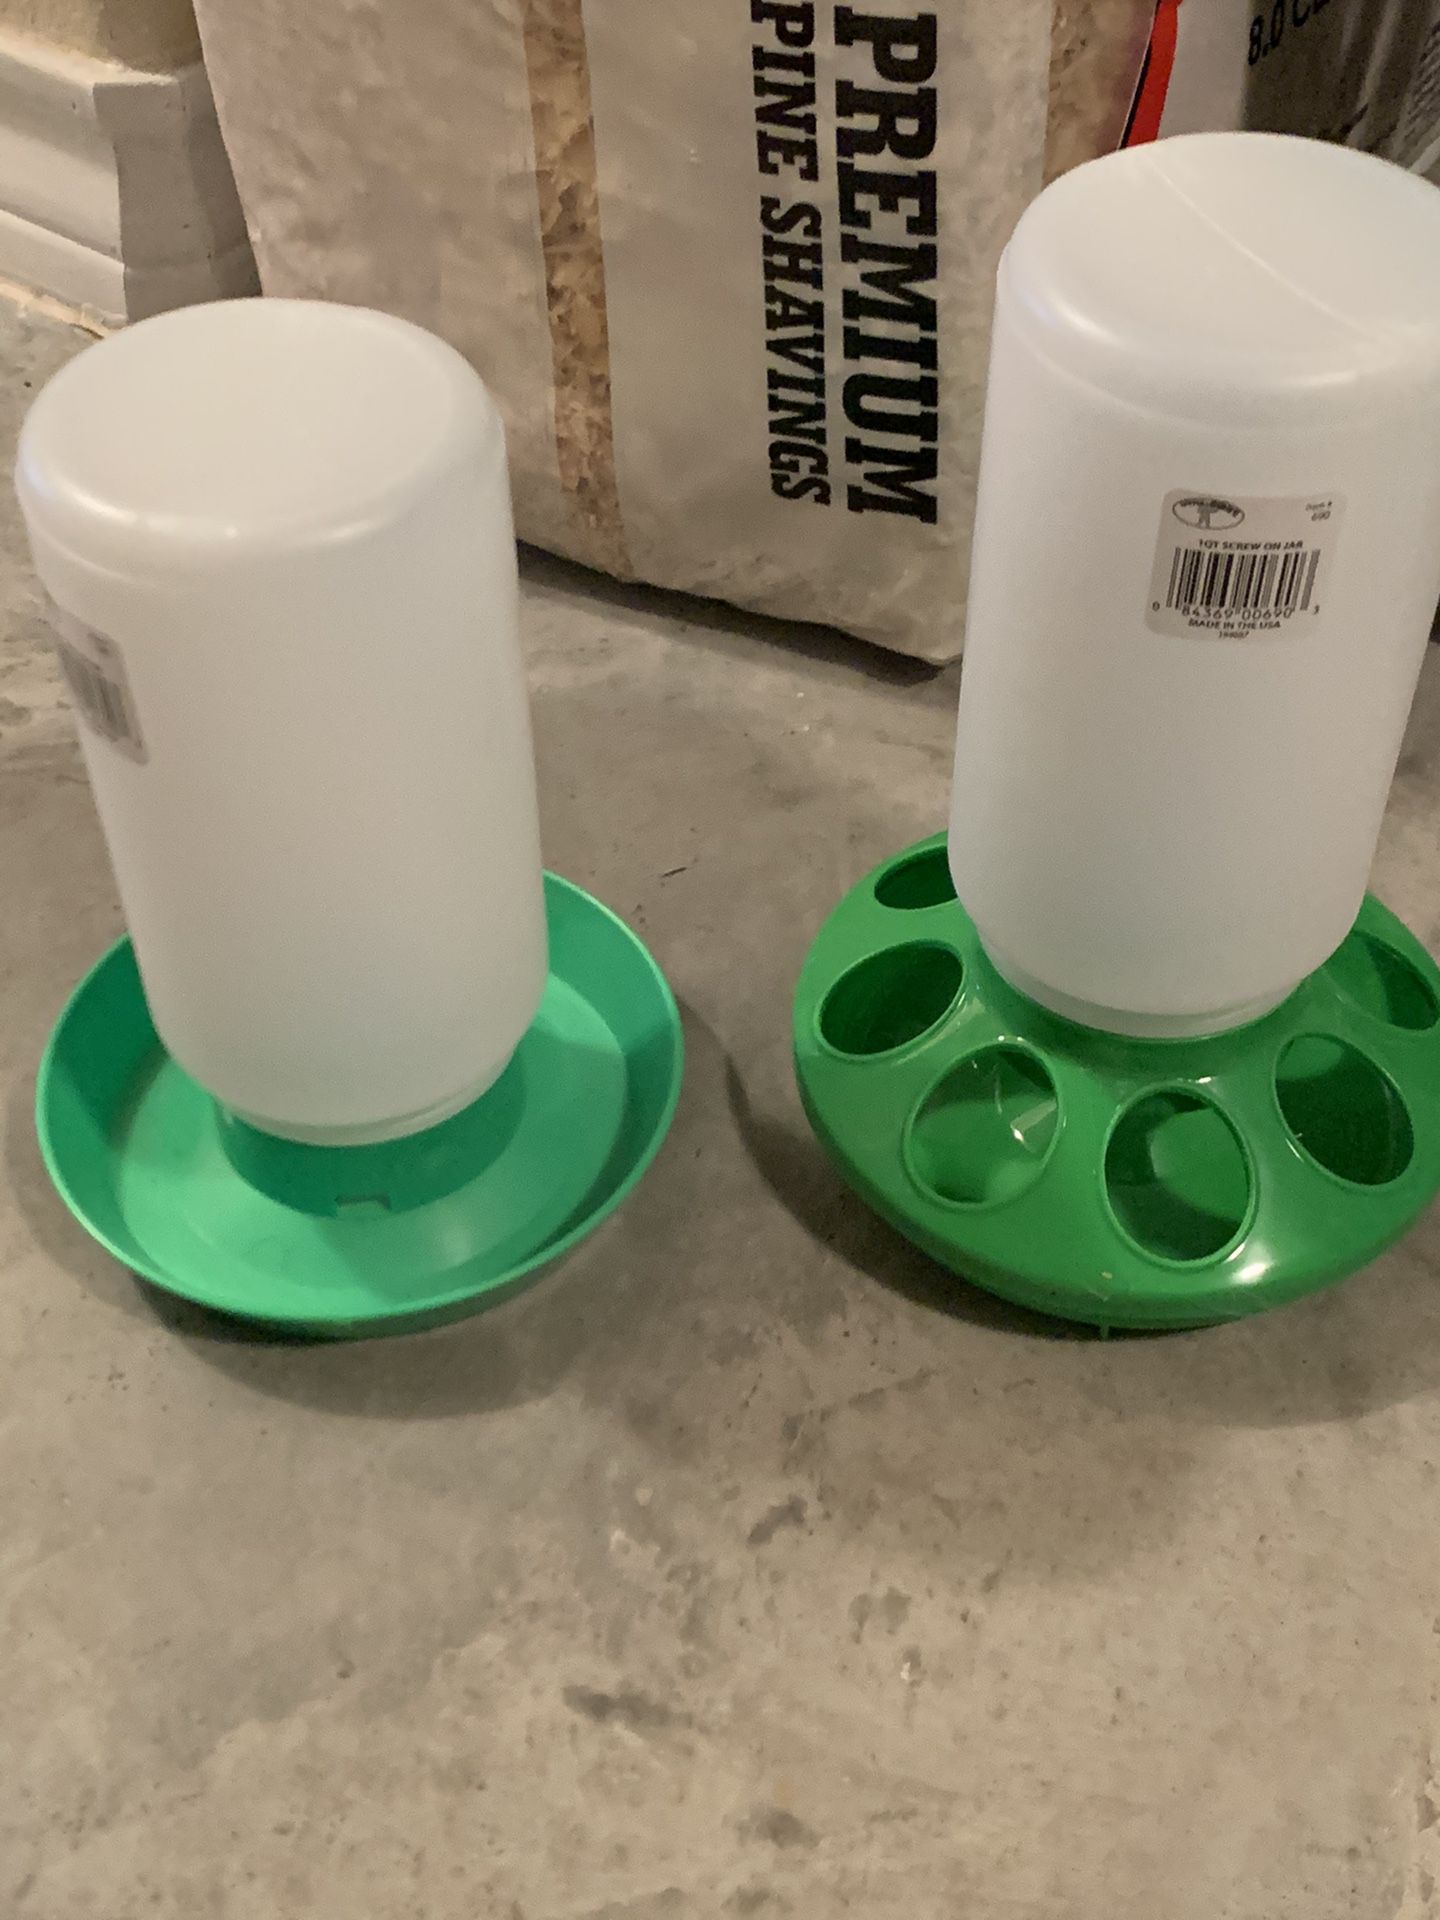 Pet feeder/water container